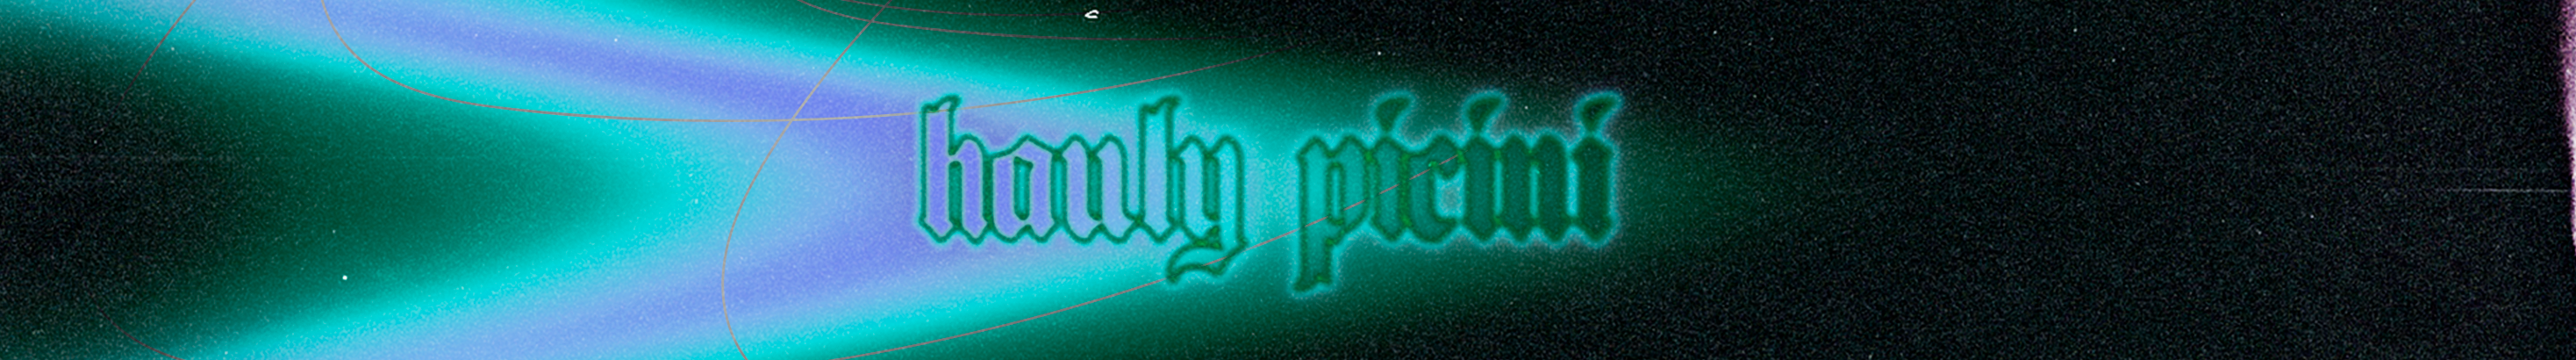 Hauly Picinis profilbanner